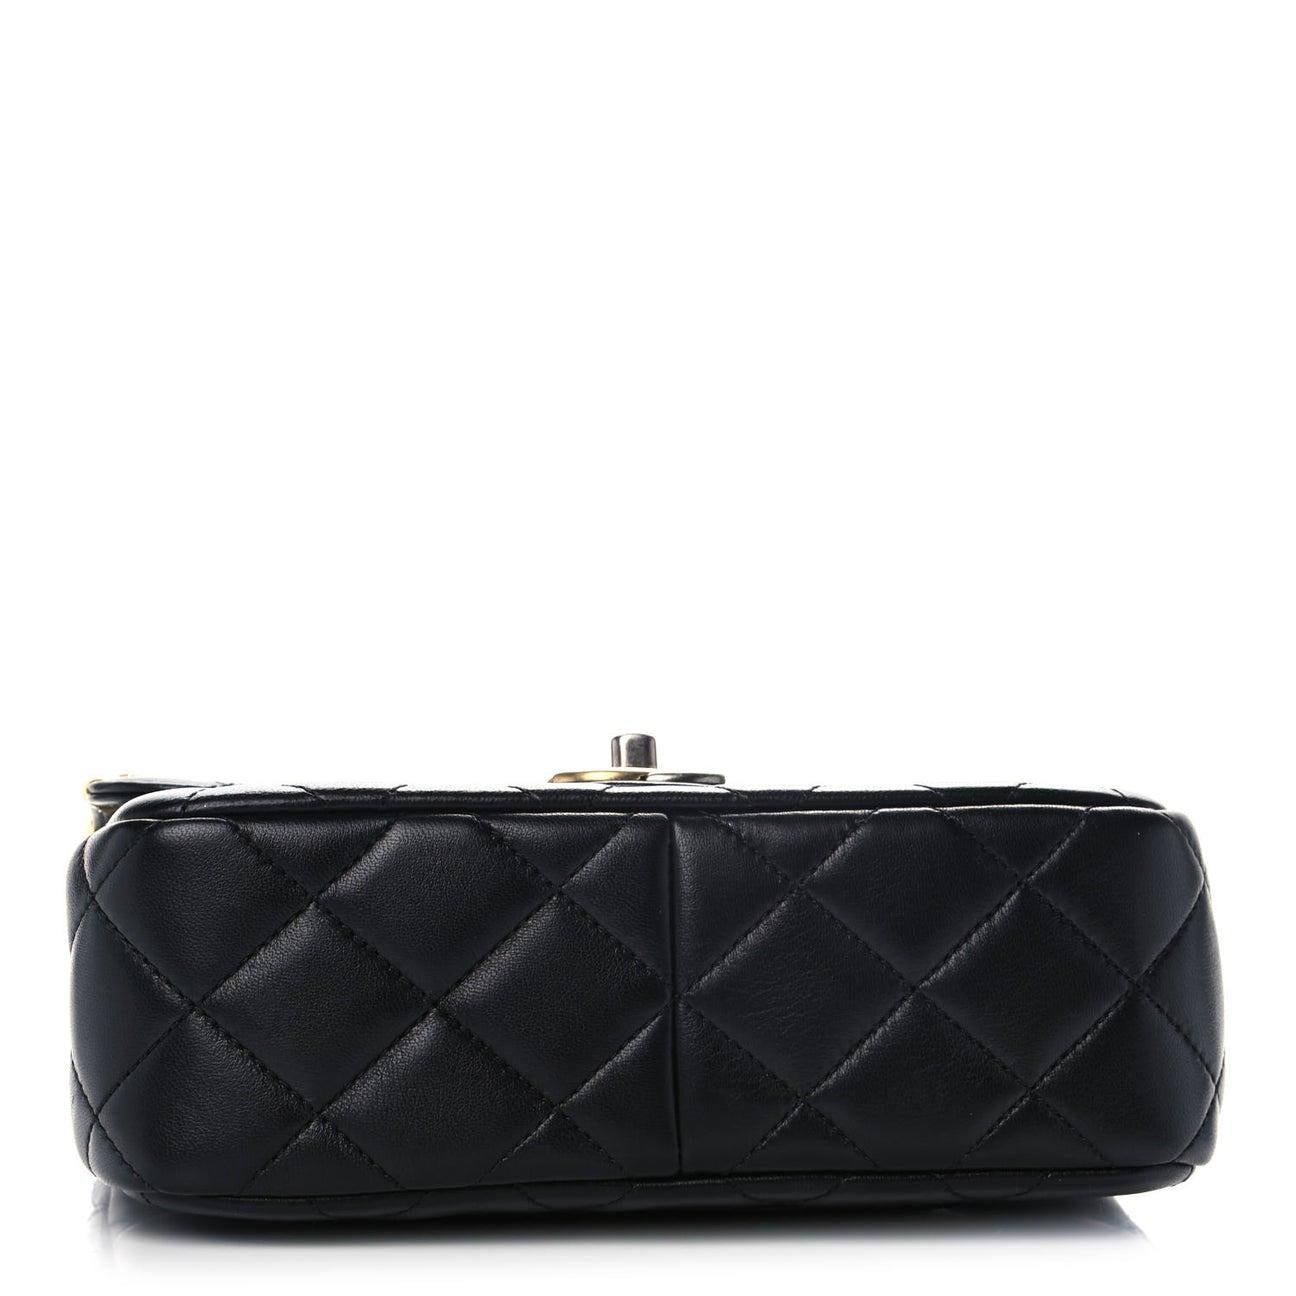 CHANEL Black Lambskin Quilted Leather Charms Gold Gunmetal Shoulder ...